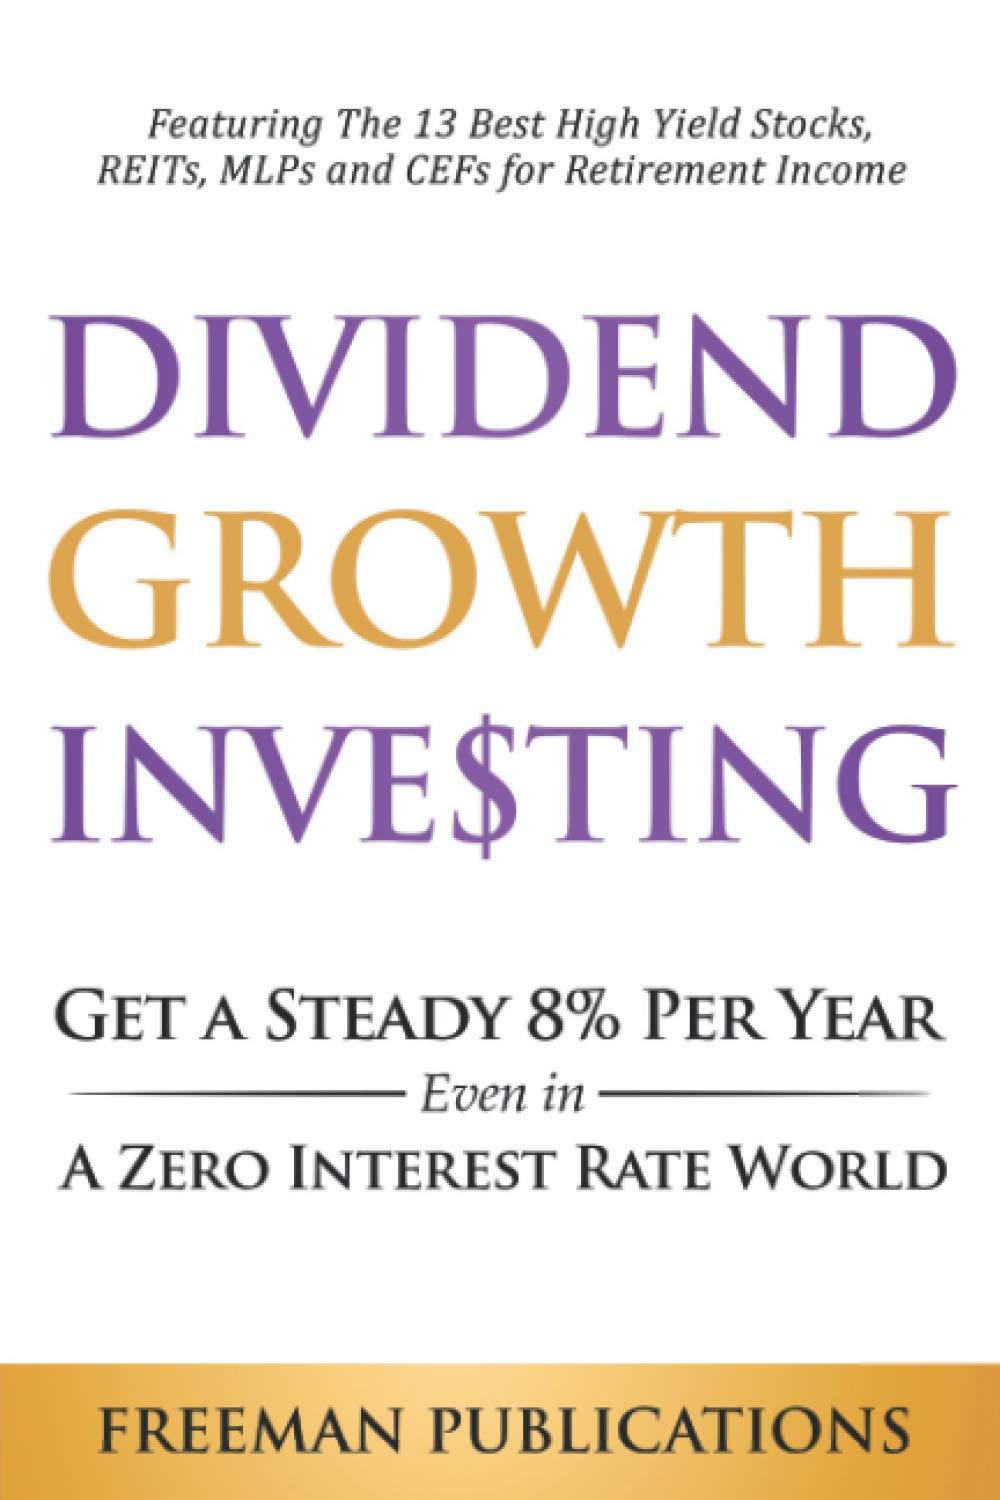 dividend growth investing get a steady 8 per year even in a zero interest rate world featuring the 13 best